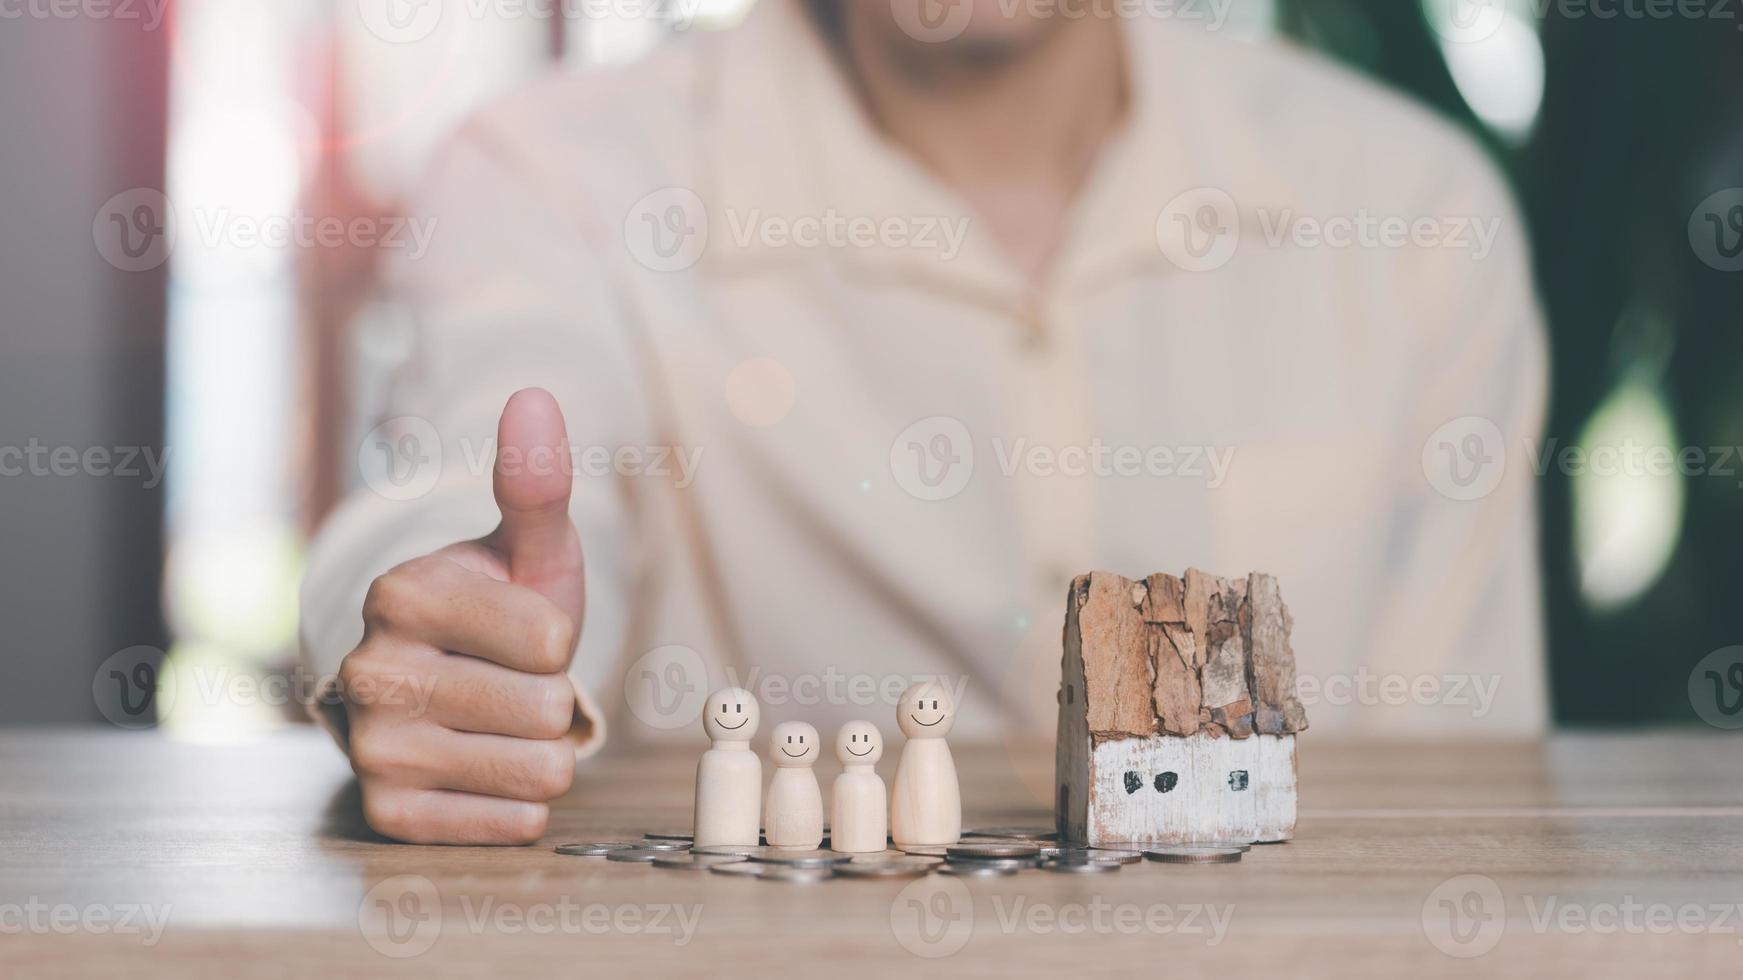 Male hands, wooden dolls, and model houses,Concept of protection and safety protection,insurance management planning To ensure both health and financial safety,Property and Family Risk Reduction photo